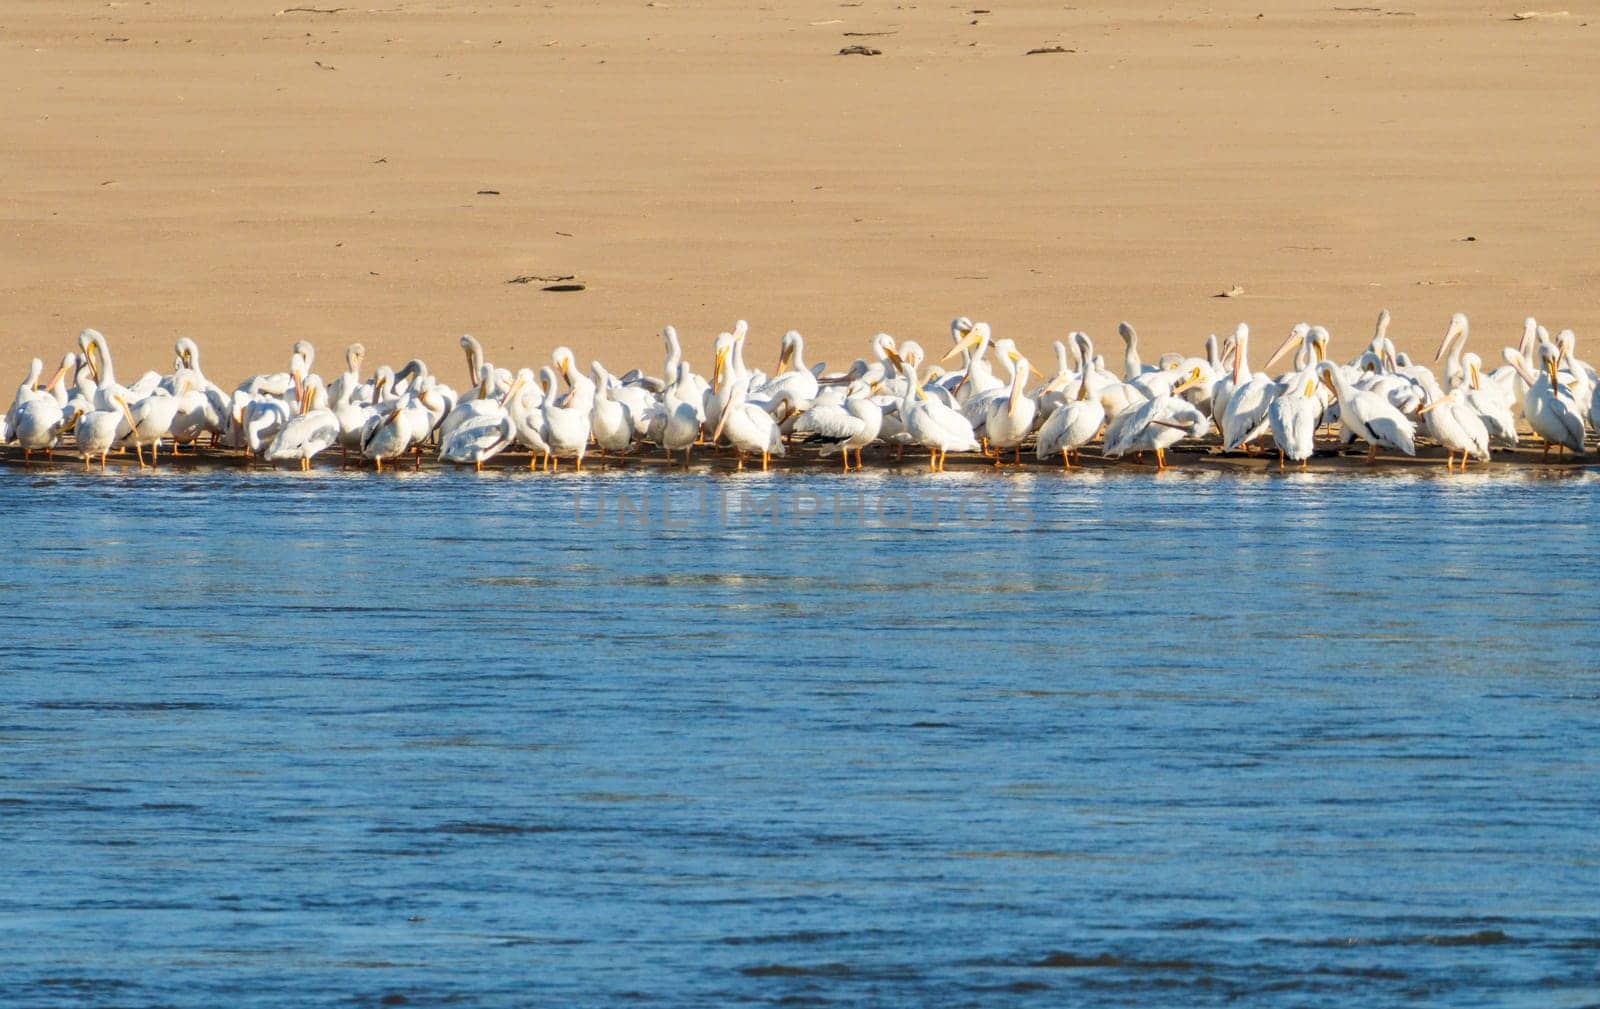 Large squadron of American white pelicans on edge of sandbank due to low water levels on Mississippi river in 2023